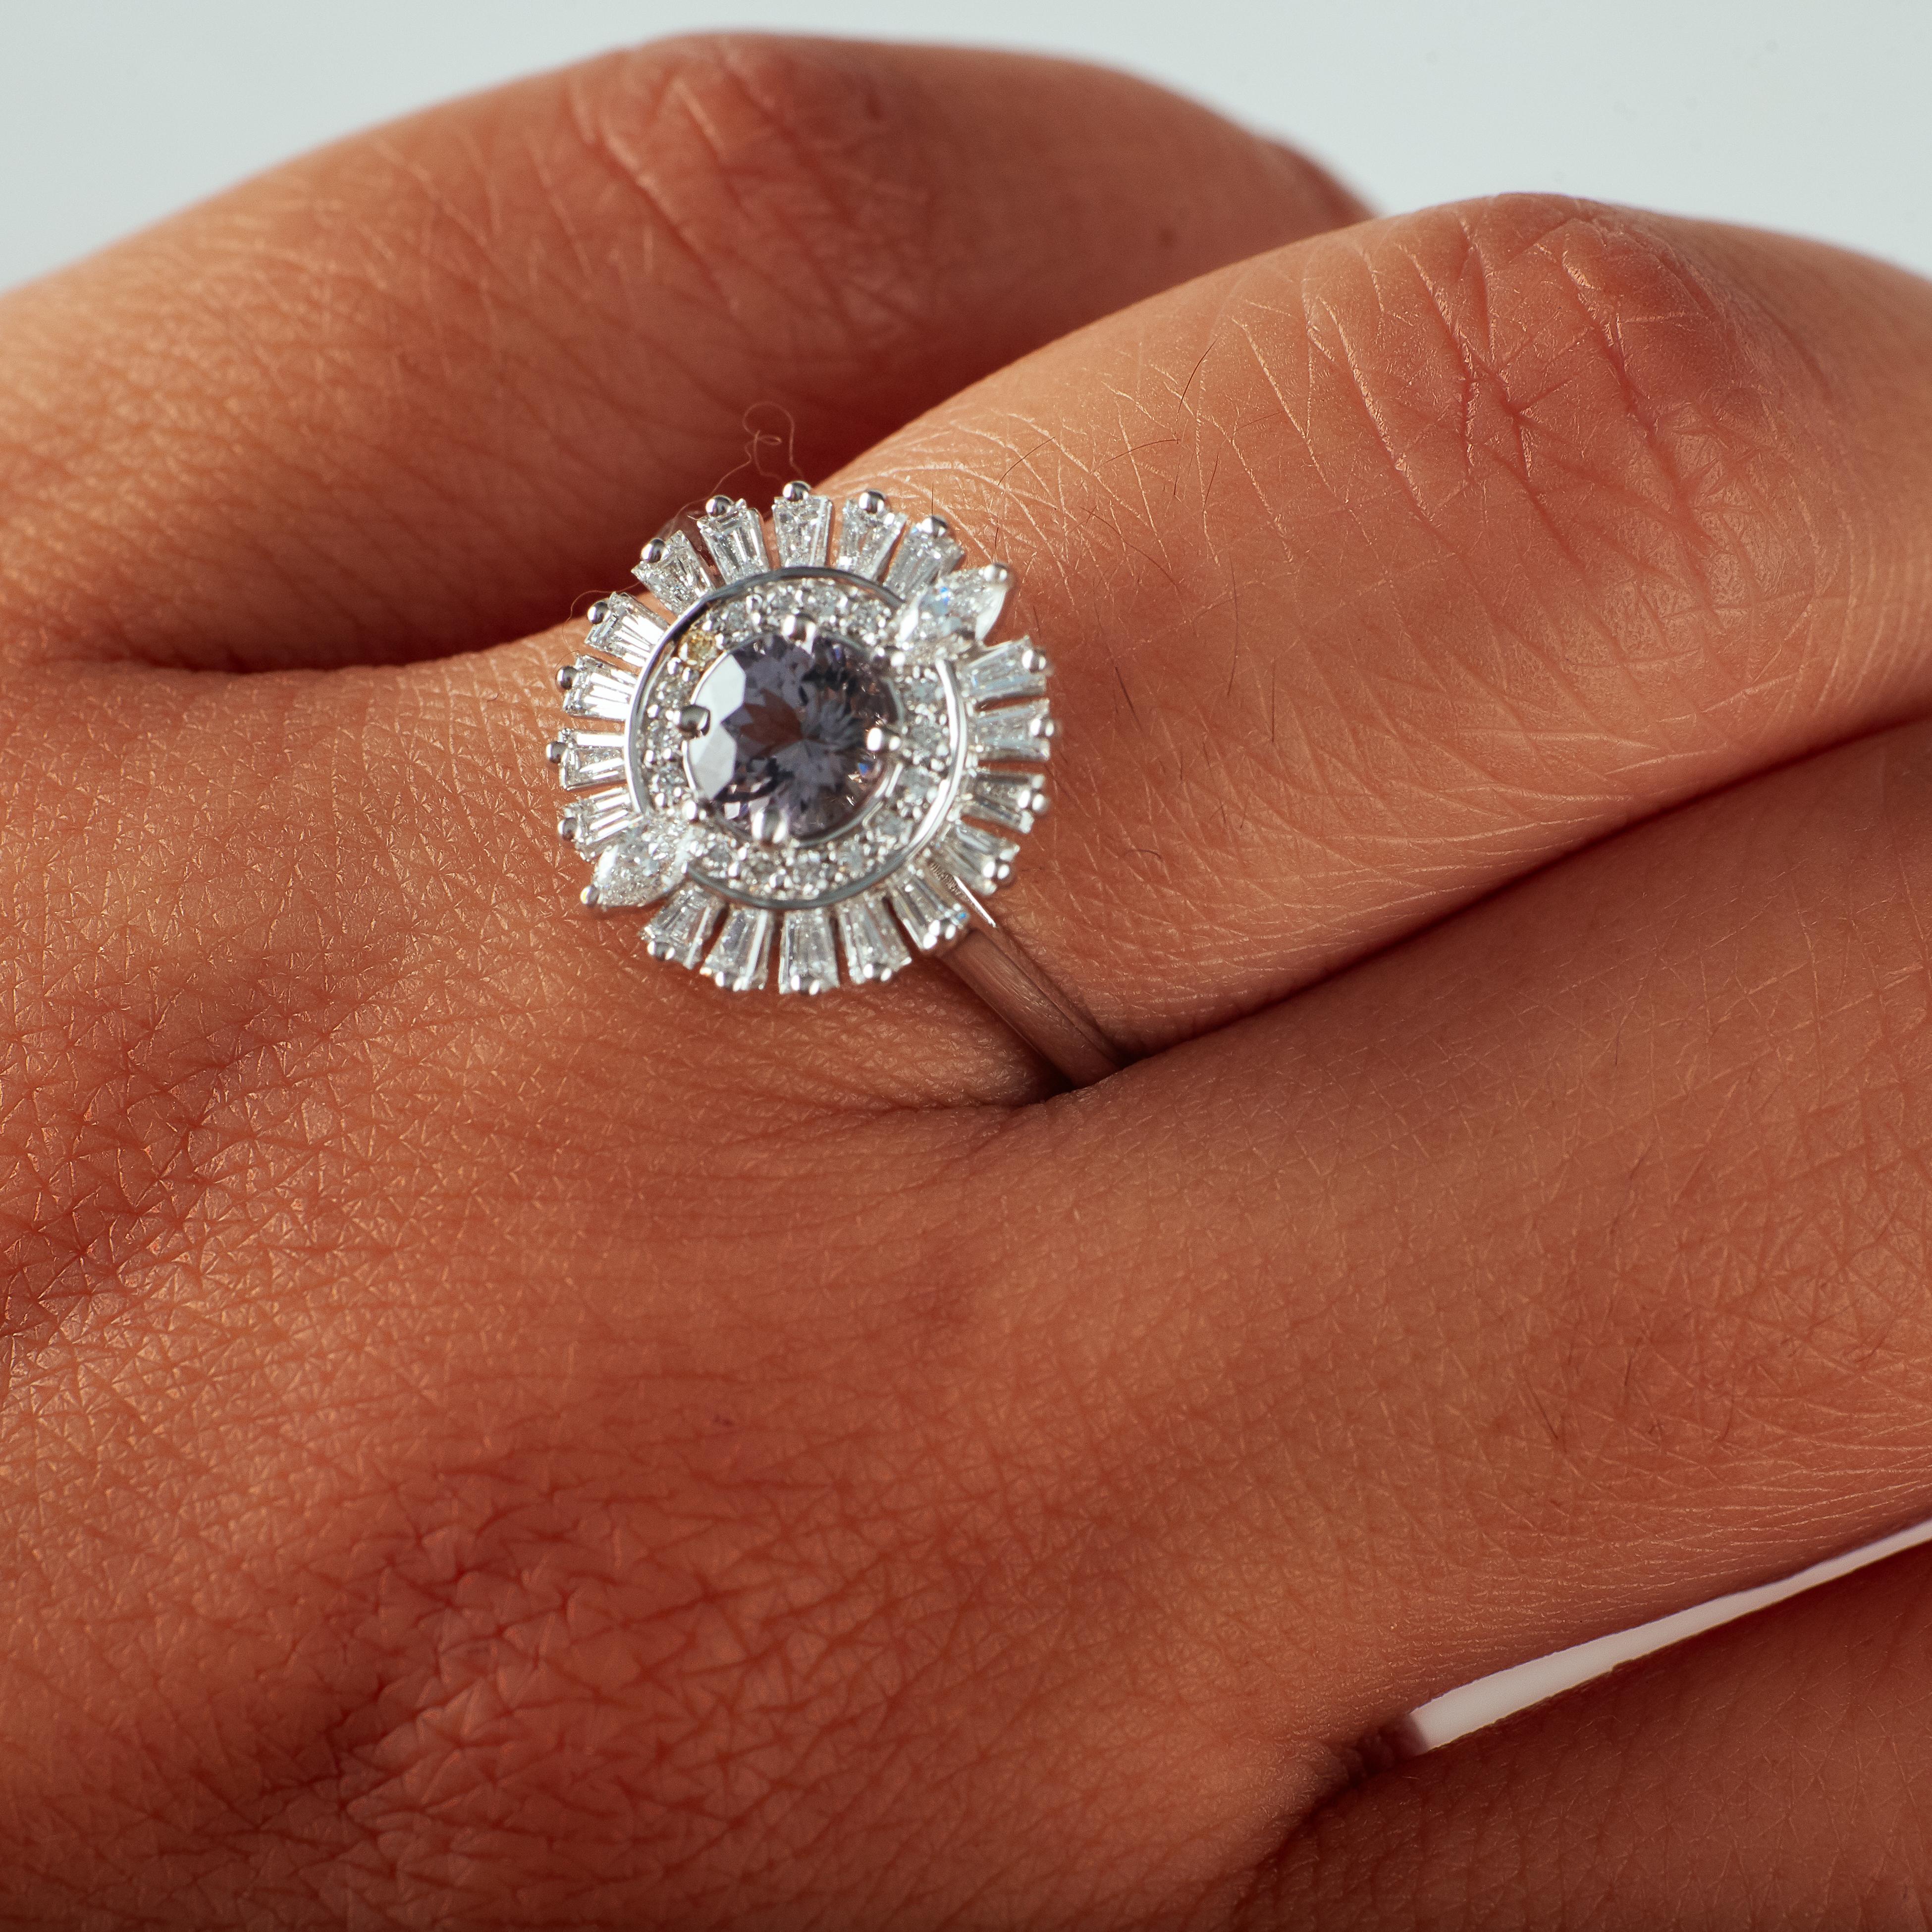 The name says it all! This gasp-worthy 14k white gold ring features an incredible grey spinel center stone accentuated by a .75ctw diamond halo. Perfect for the bride who loves a hint of vintage glamour

Materials + Dimensions: 14k white gold,